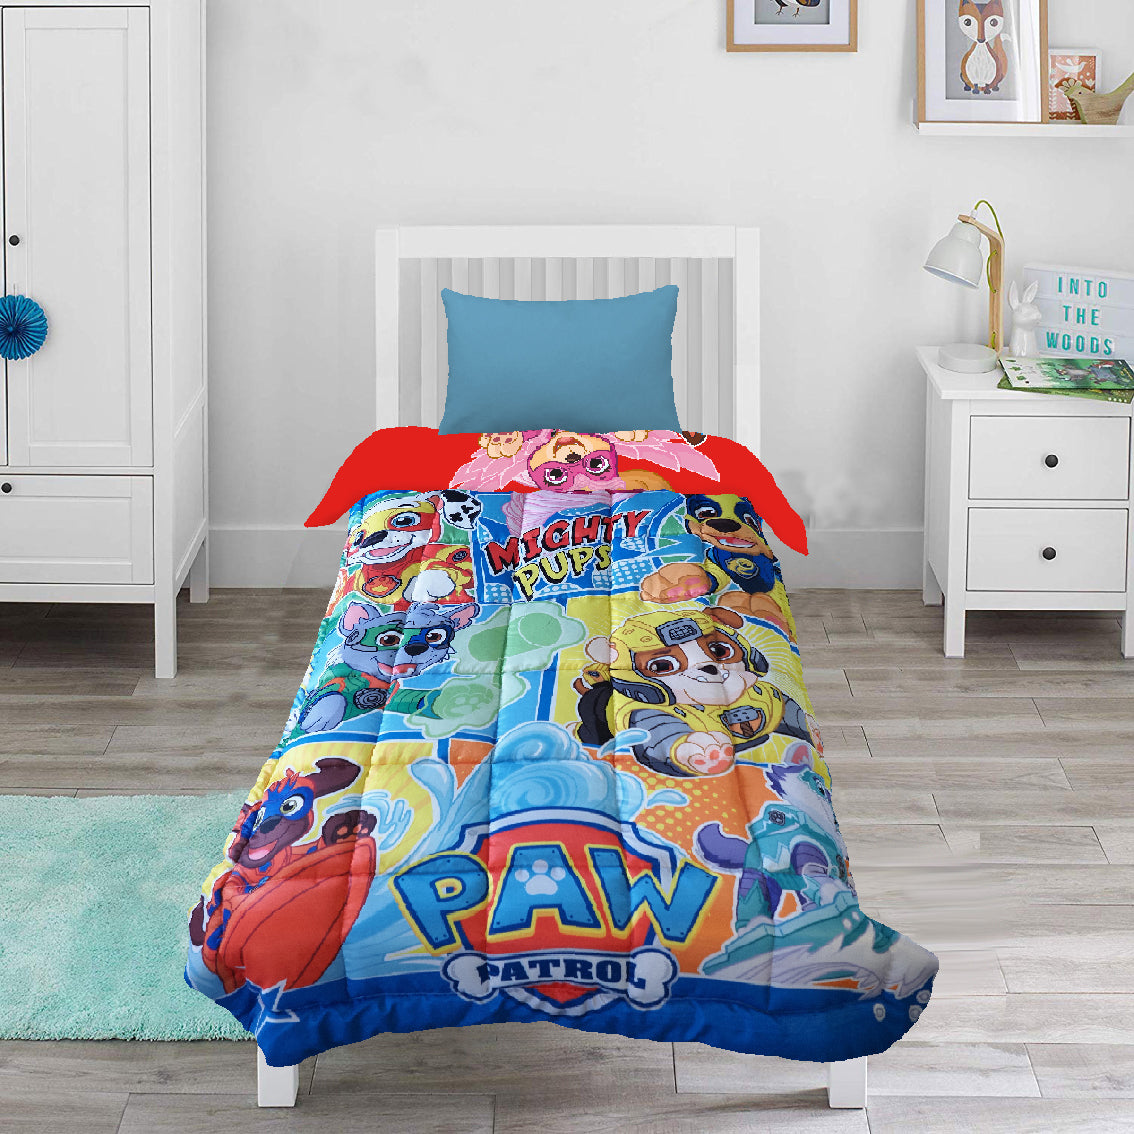 Paw Patrol Reversible Mighty Pups 100% Cotton Comforter - Toddler Size 150 x 120 cms